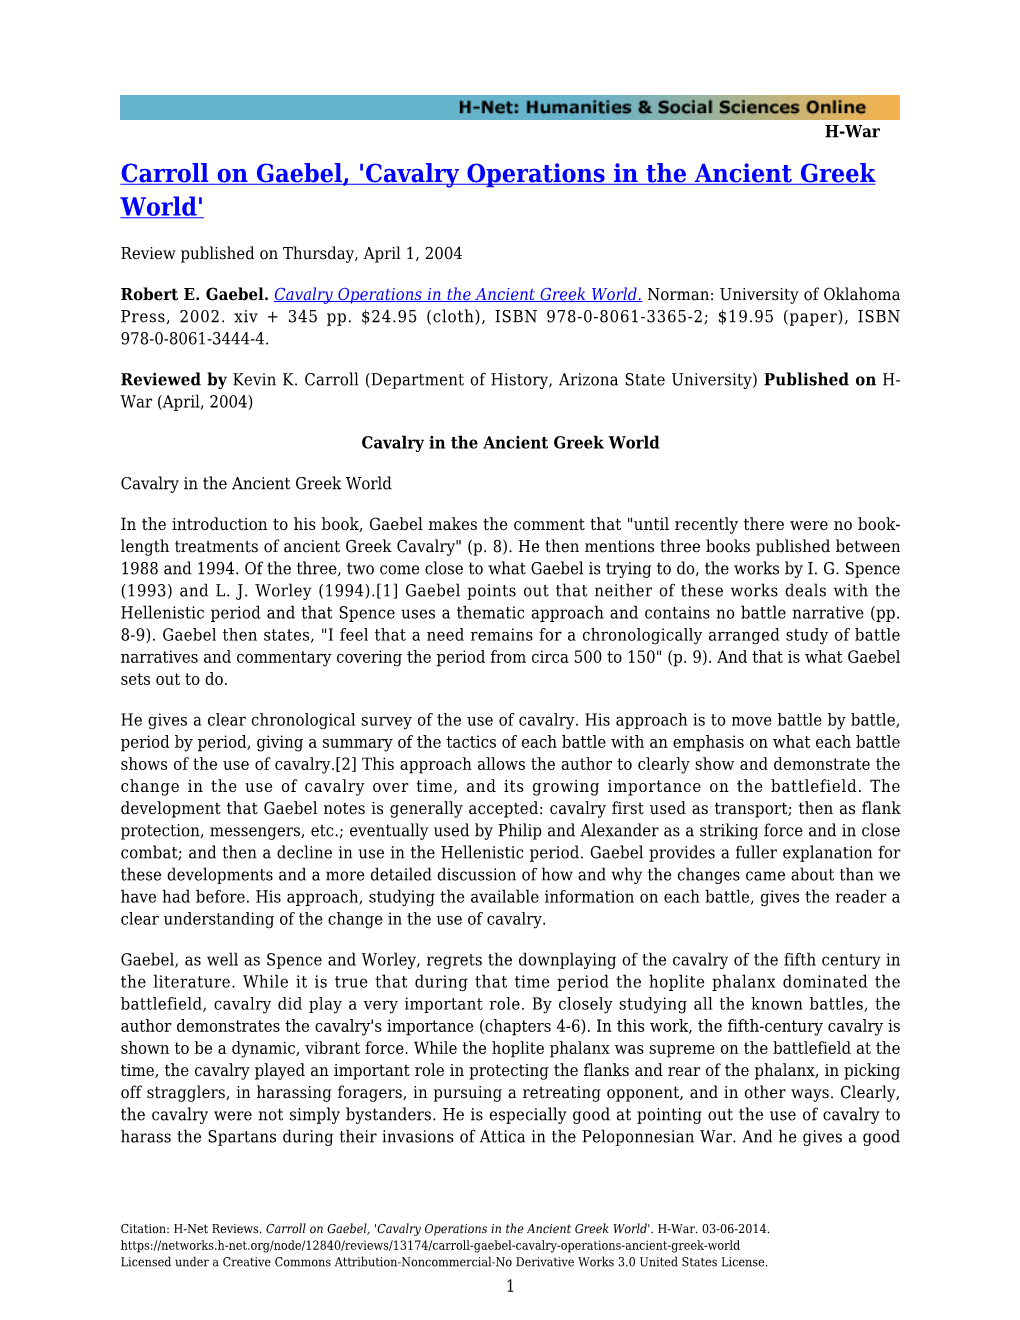 Carroll on Gaebel, 'Cavalry Operations in the Ancient Greek World'